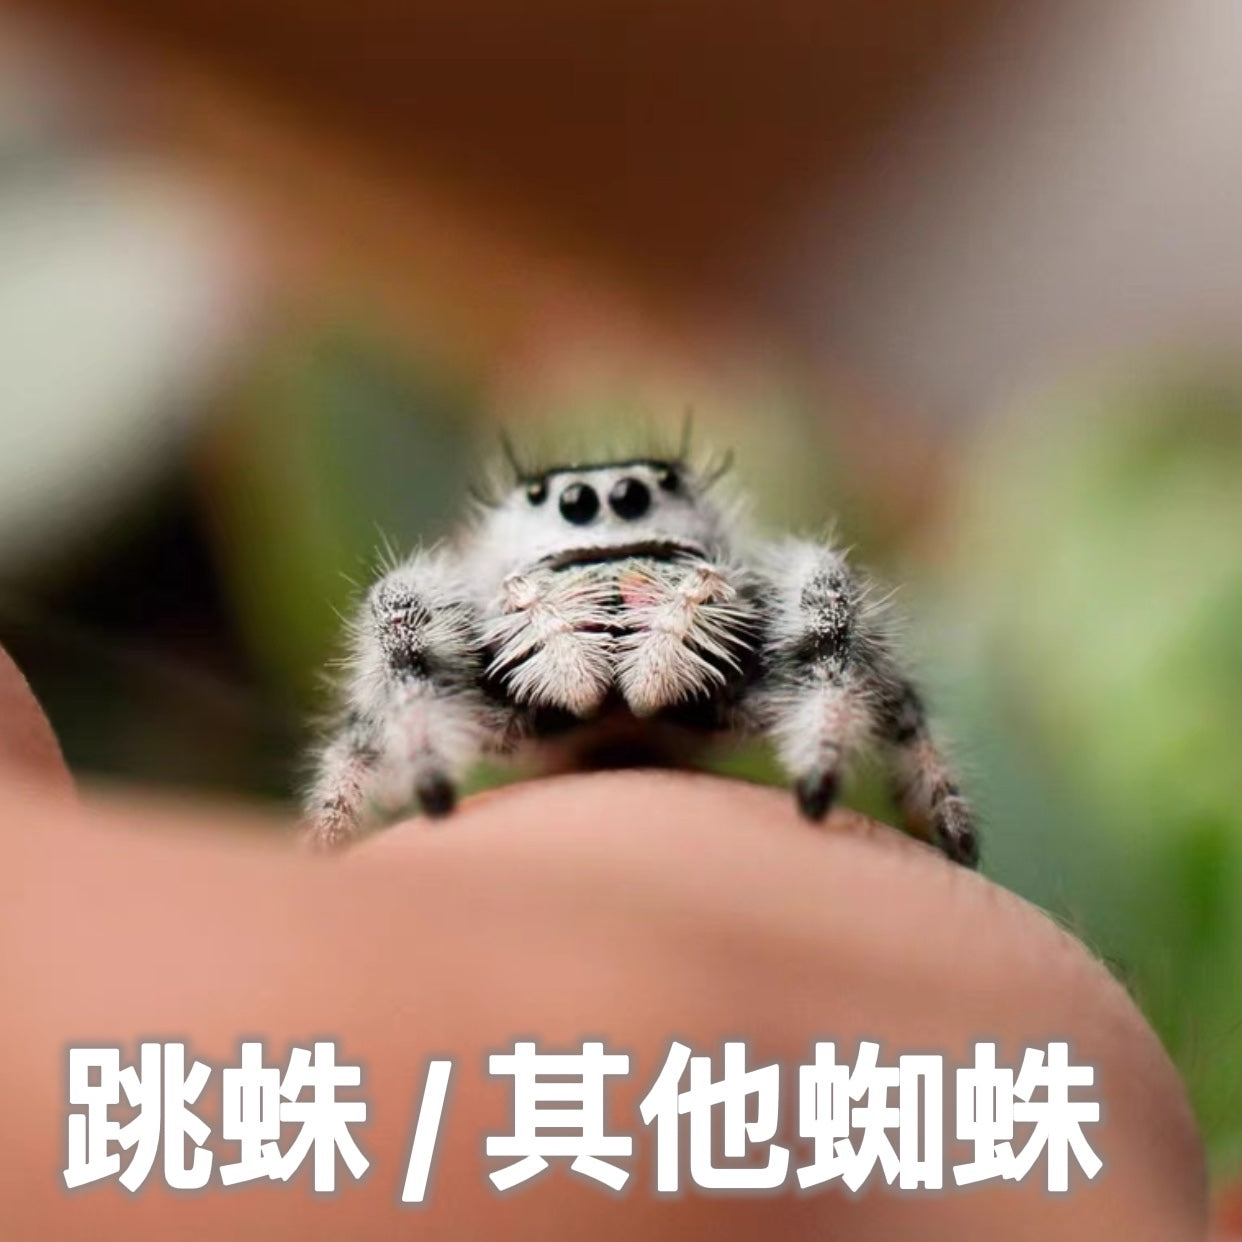 Jumping Spider/Other Spiders